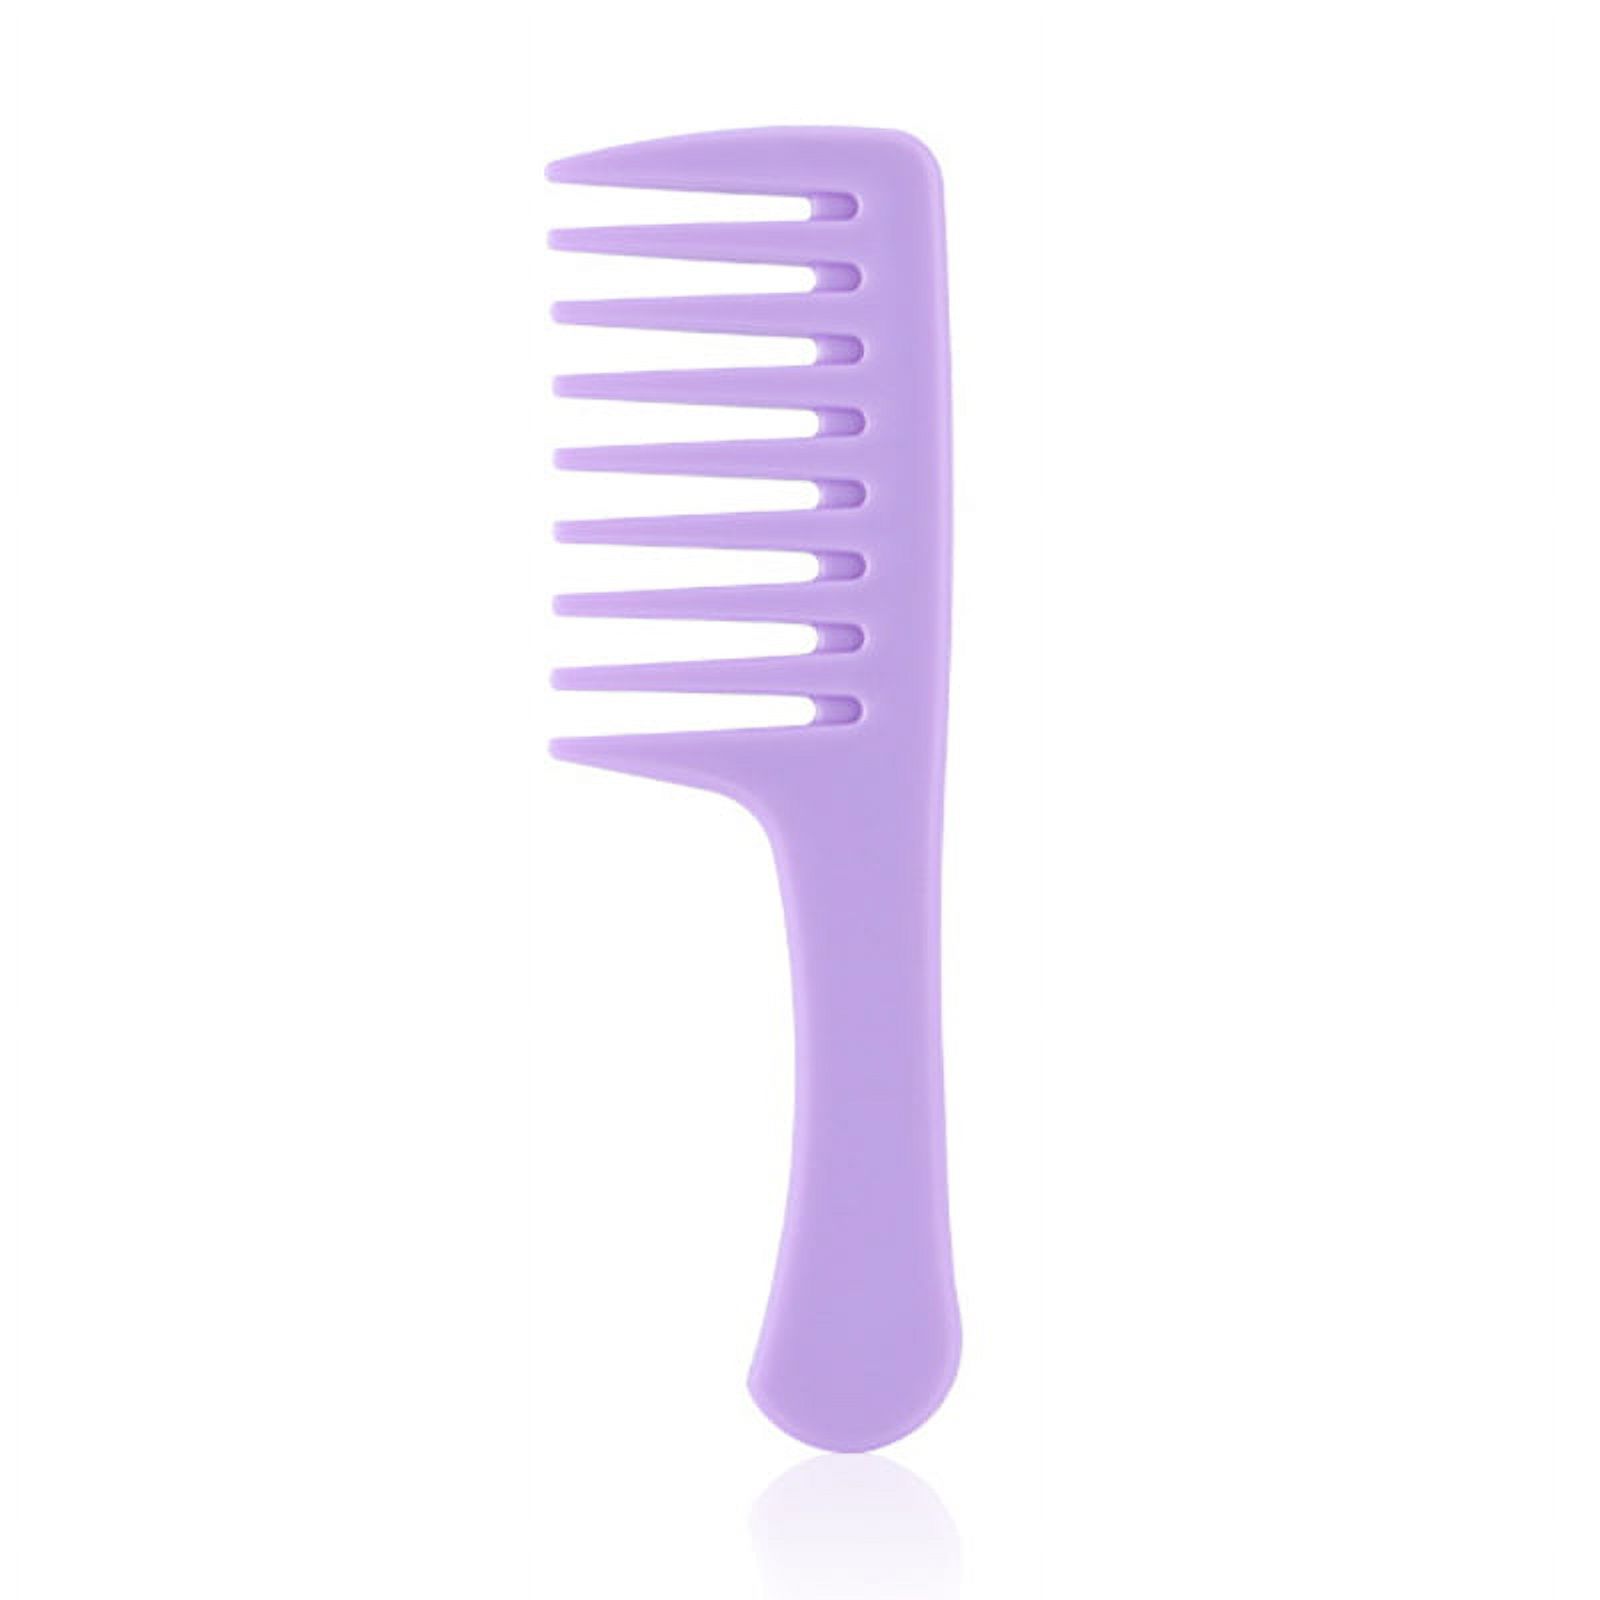 Smooth Hair Comb Plastic Household Candy Color Big Tooth Comb Purple Wide Tooth Comb Durable Detangling Hair Brush Professional Handgrip Comb for Curly Hair Long Hair Wet Hair New - image 2 of 2